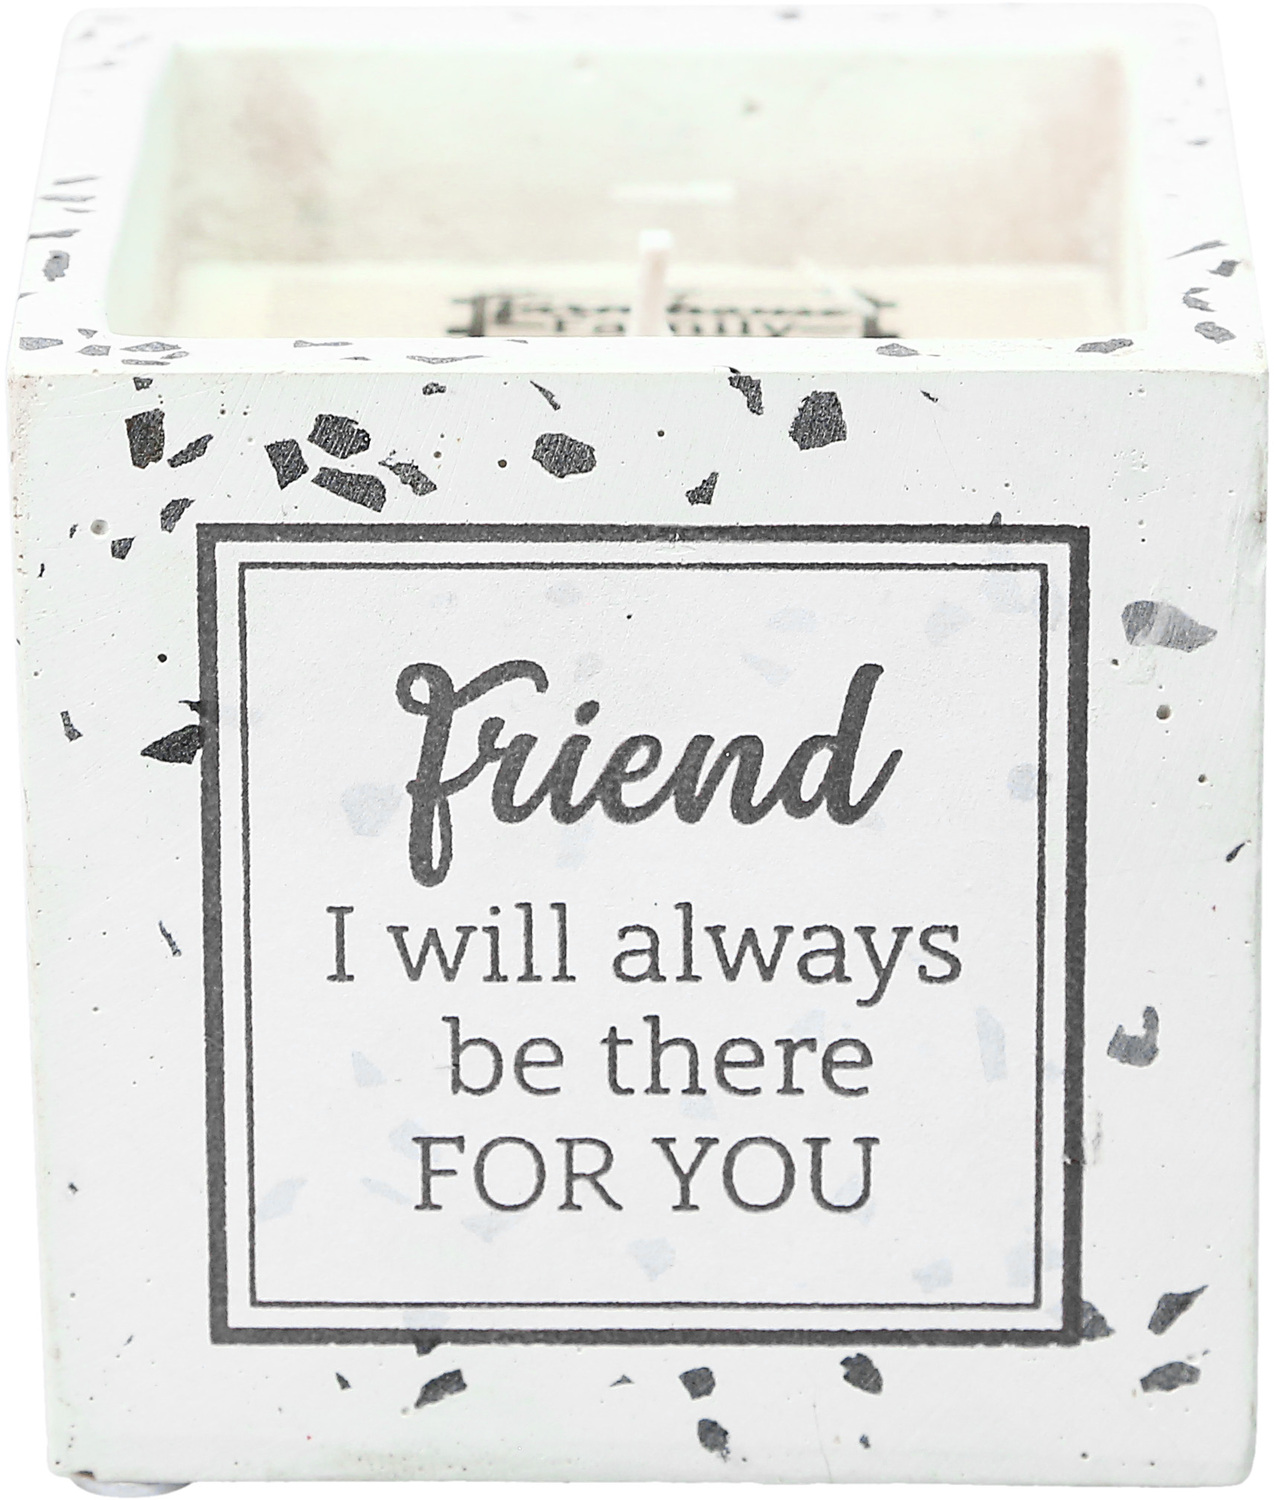 Friend by Farmhouse Family - Friend - 8 oz - 100% Soy Wax Candle Scent: Tranquility